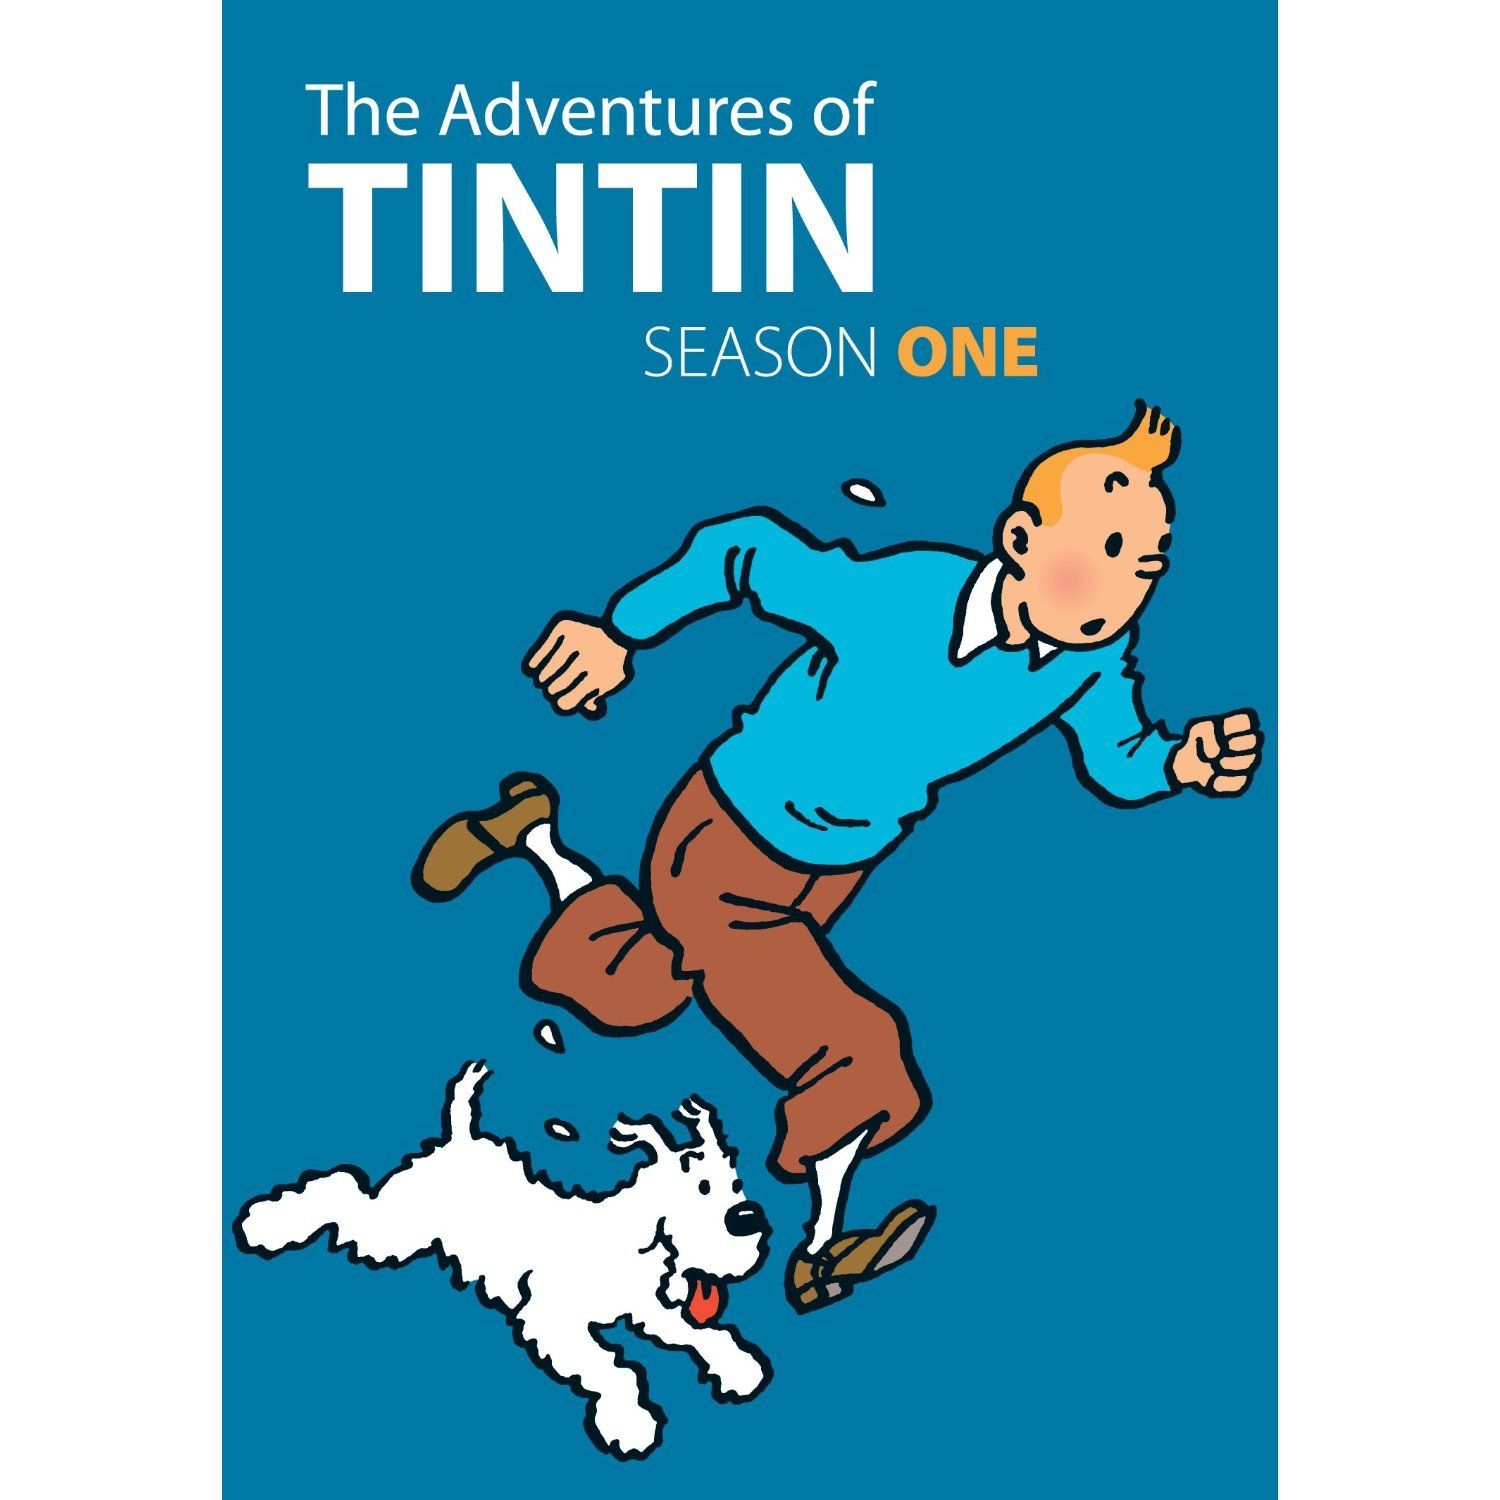 The Adventures Of Tintin Wallpapers | Just Good Vibe